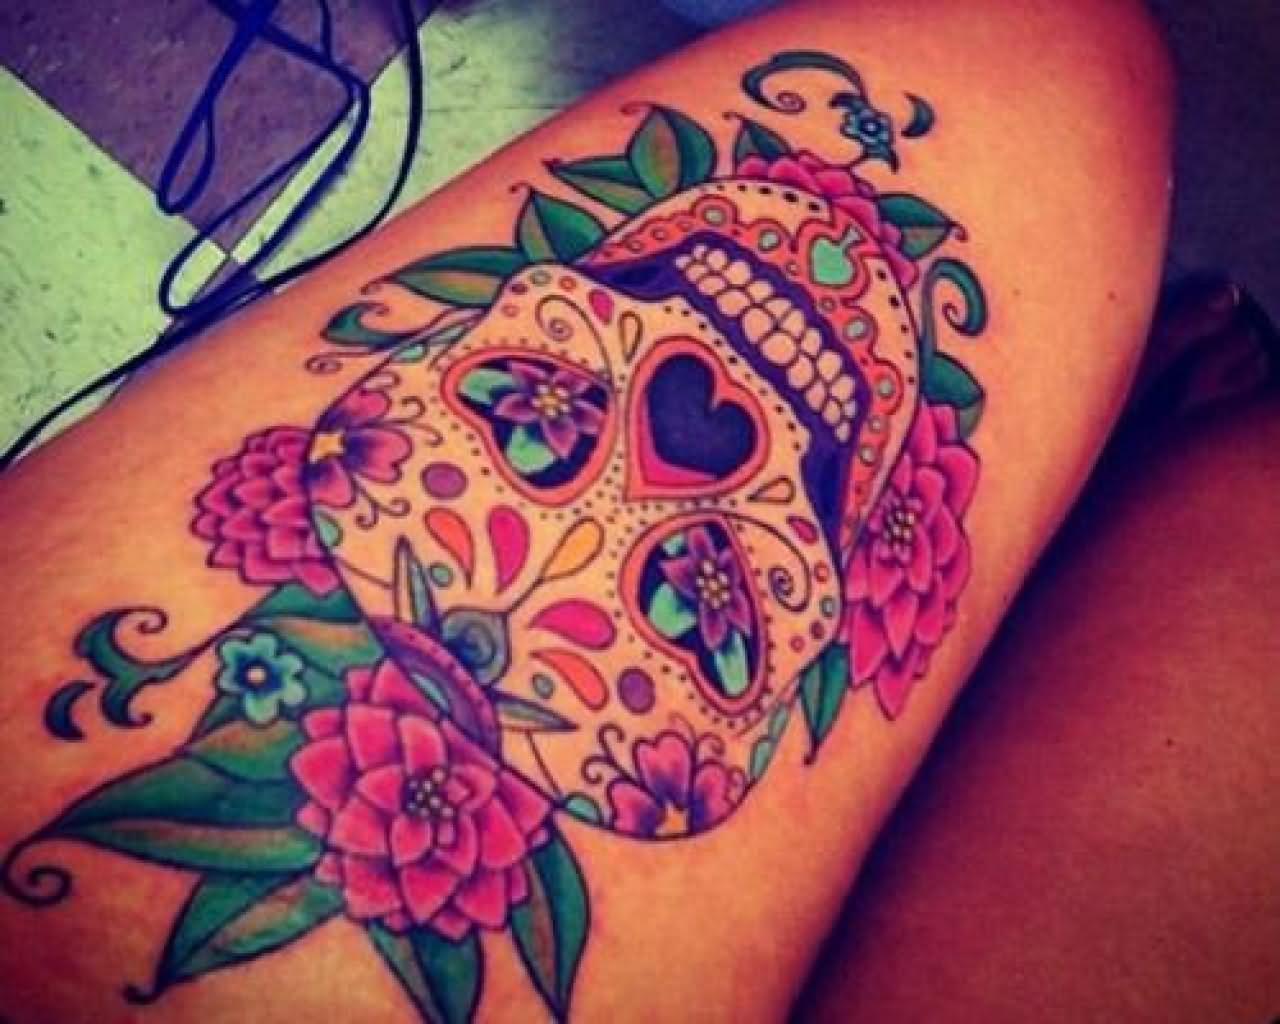 Colorful Sugar Skull With Flowers Tattoo Design For Arm